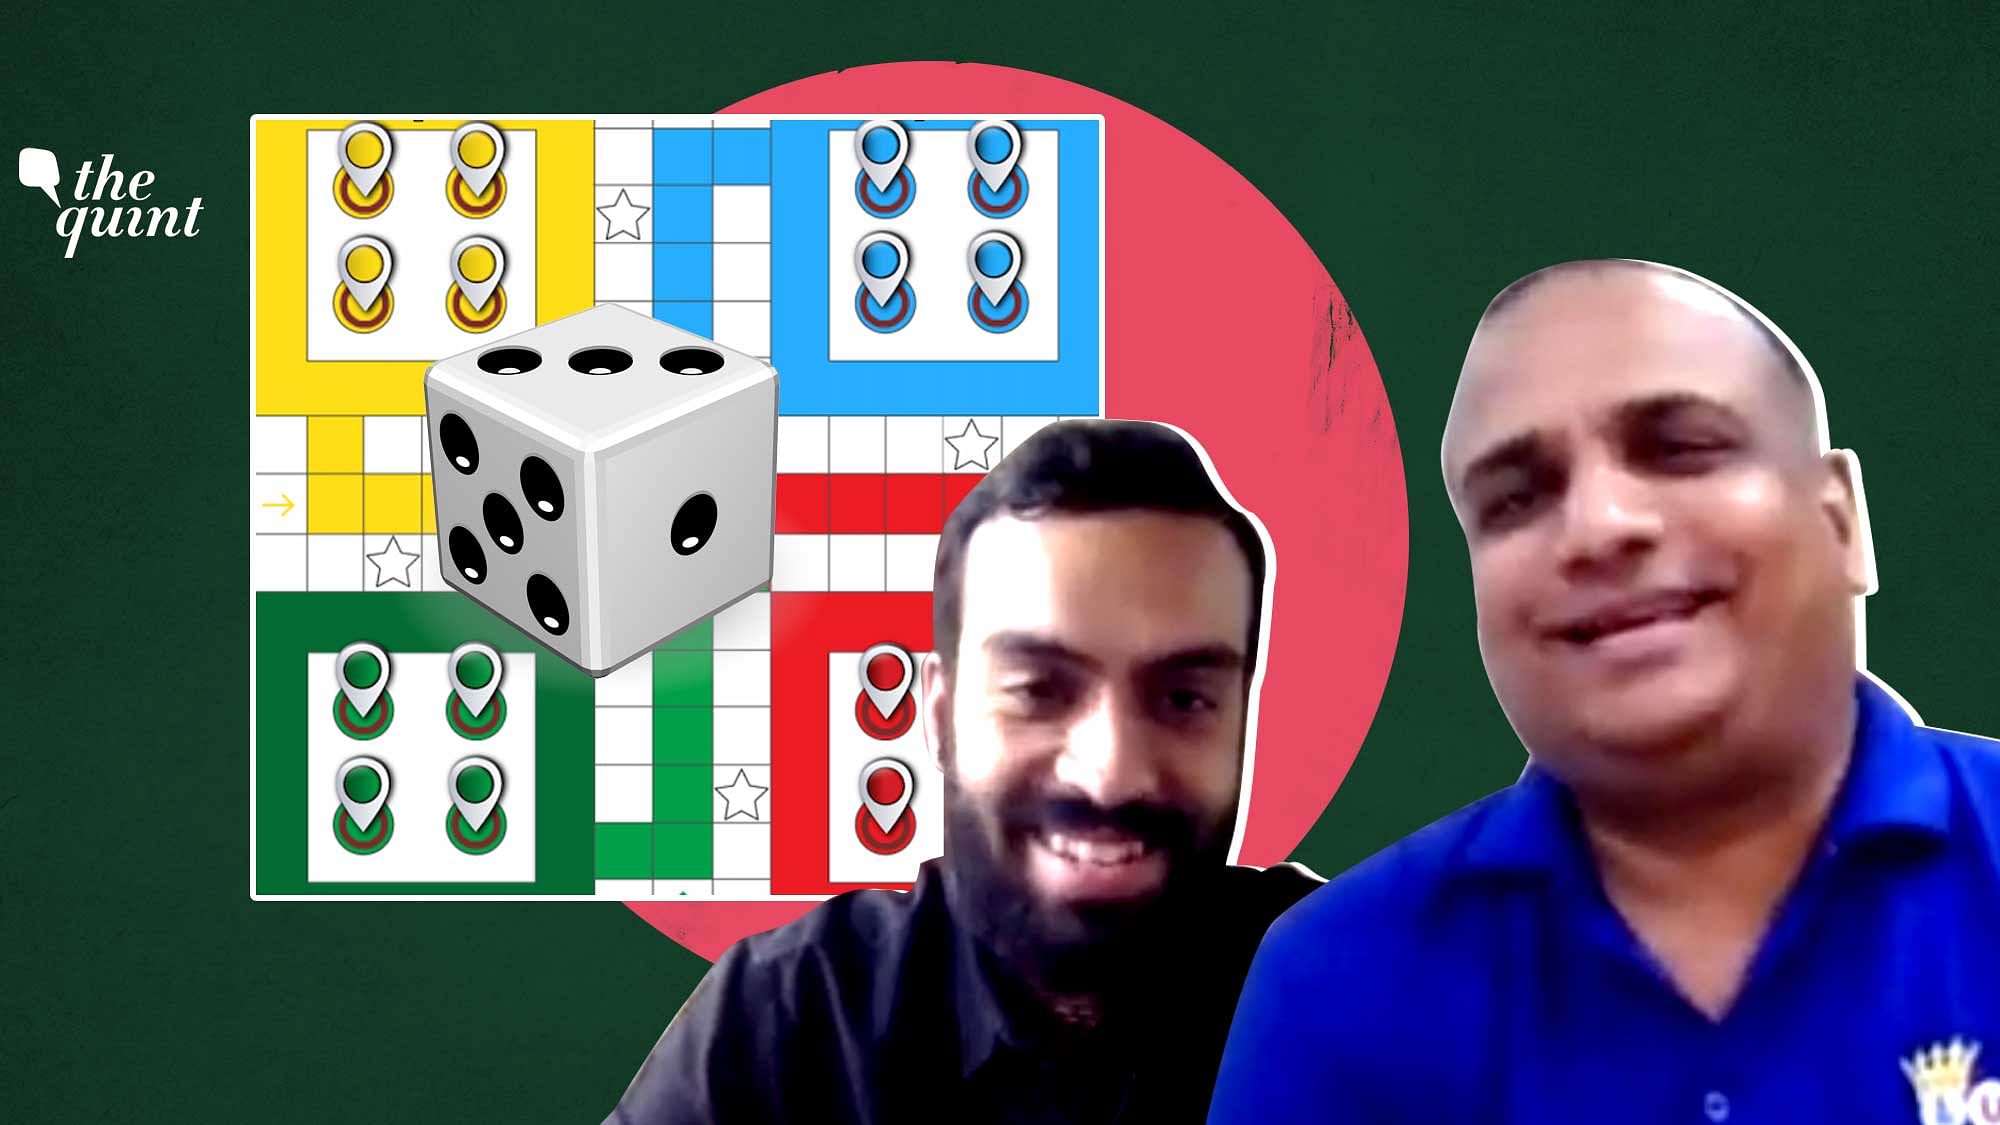 Ludo King founder &amp; CEO, Vikash Jaiswal, said that prior to the lockdown Ludo King had 15 million daily active users. However, since the lockdown began, the app has about 50 million users daily.